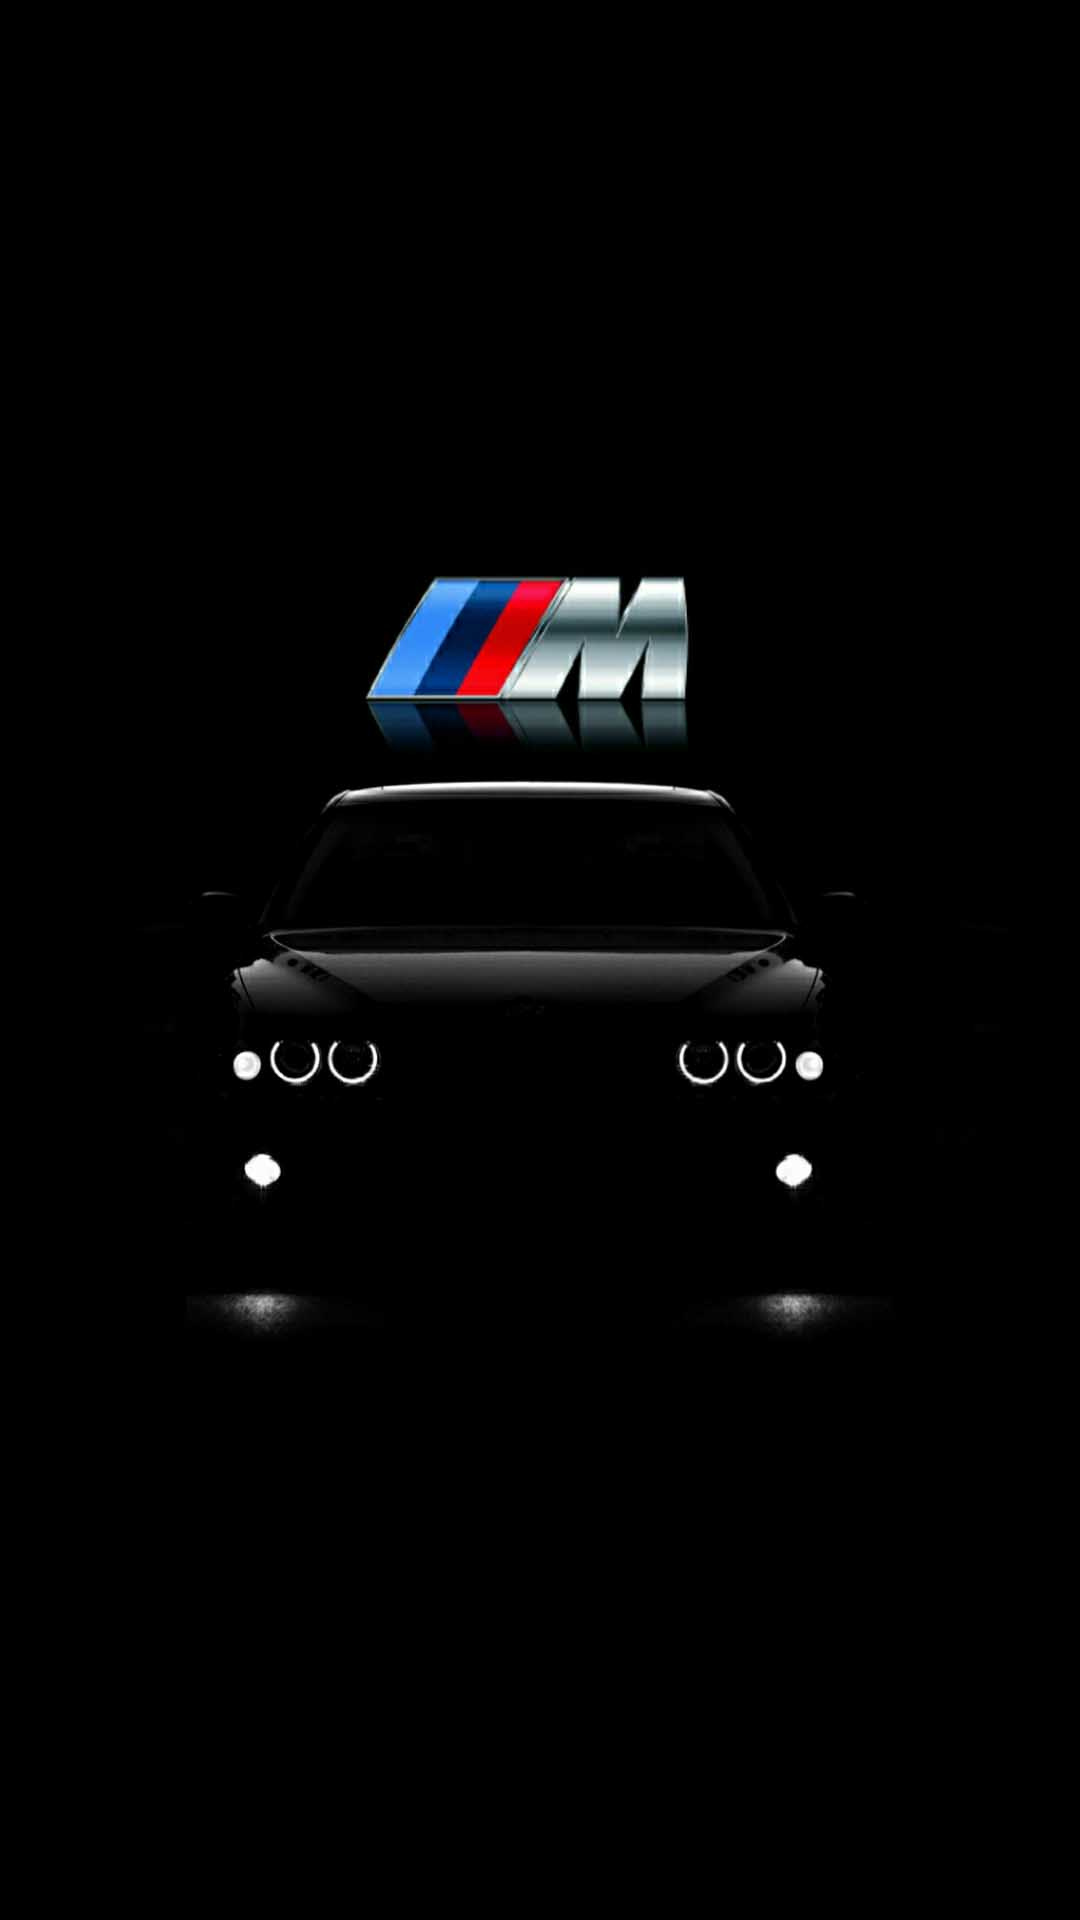 Bmw wallpaper for iphone pro max x